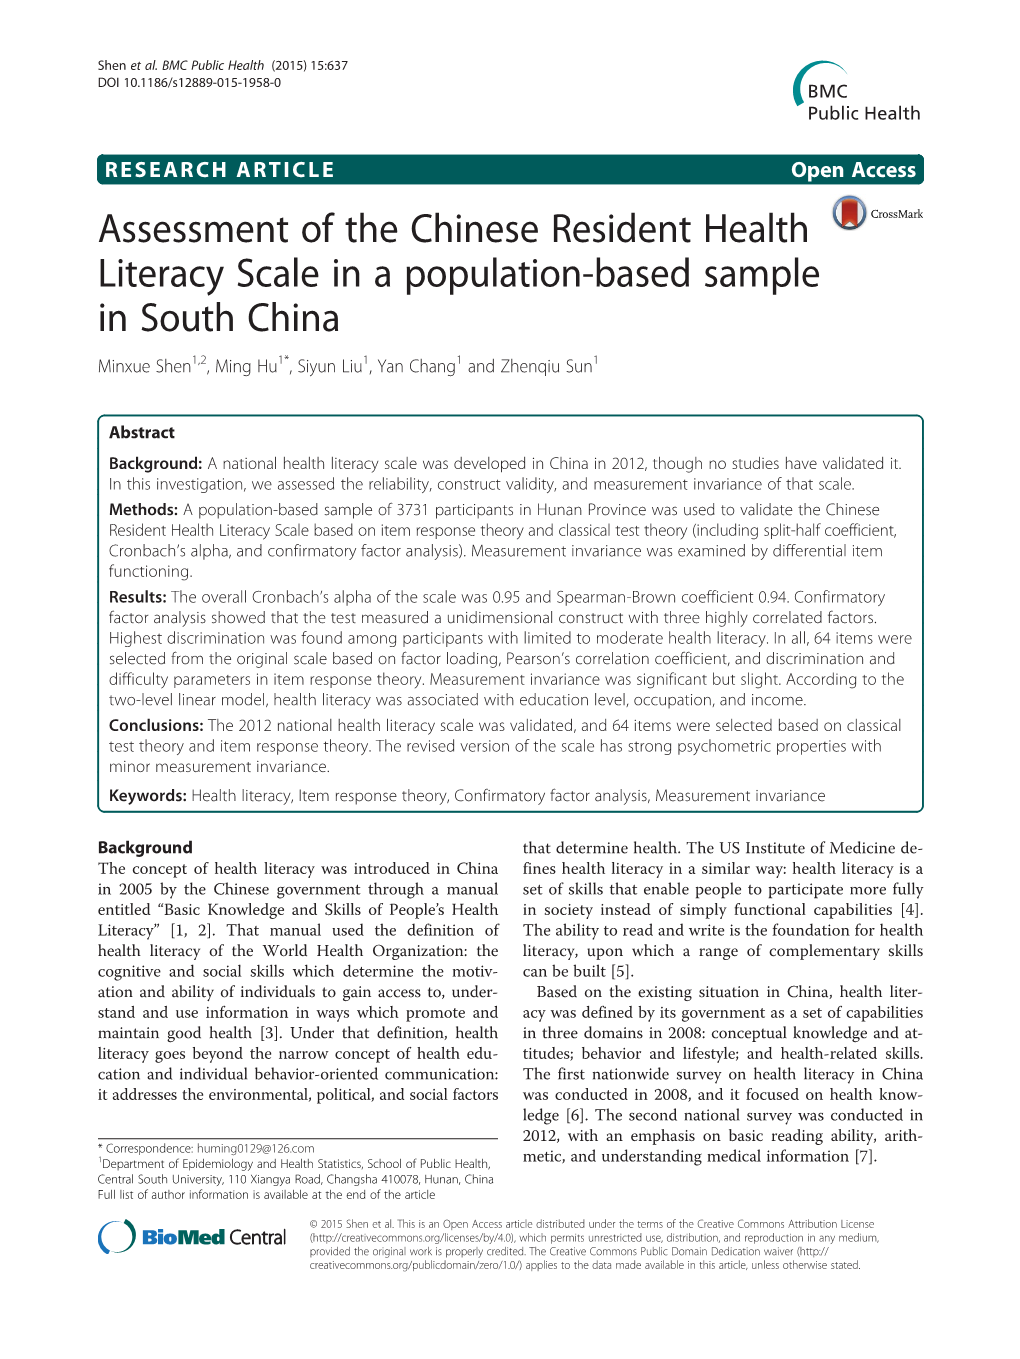 Assessment of the Chinese Resident Health Literacy Scale in a Population-Based Sample in South China